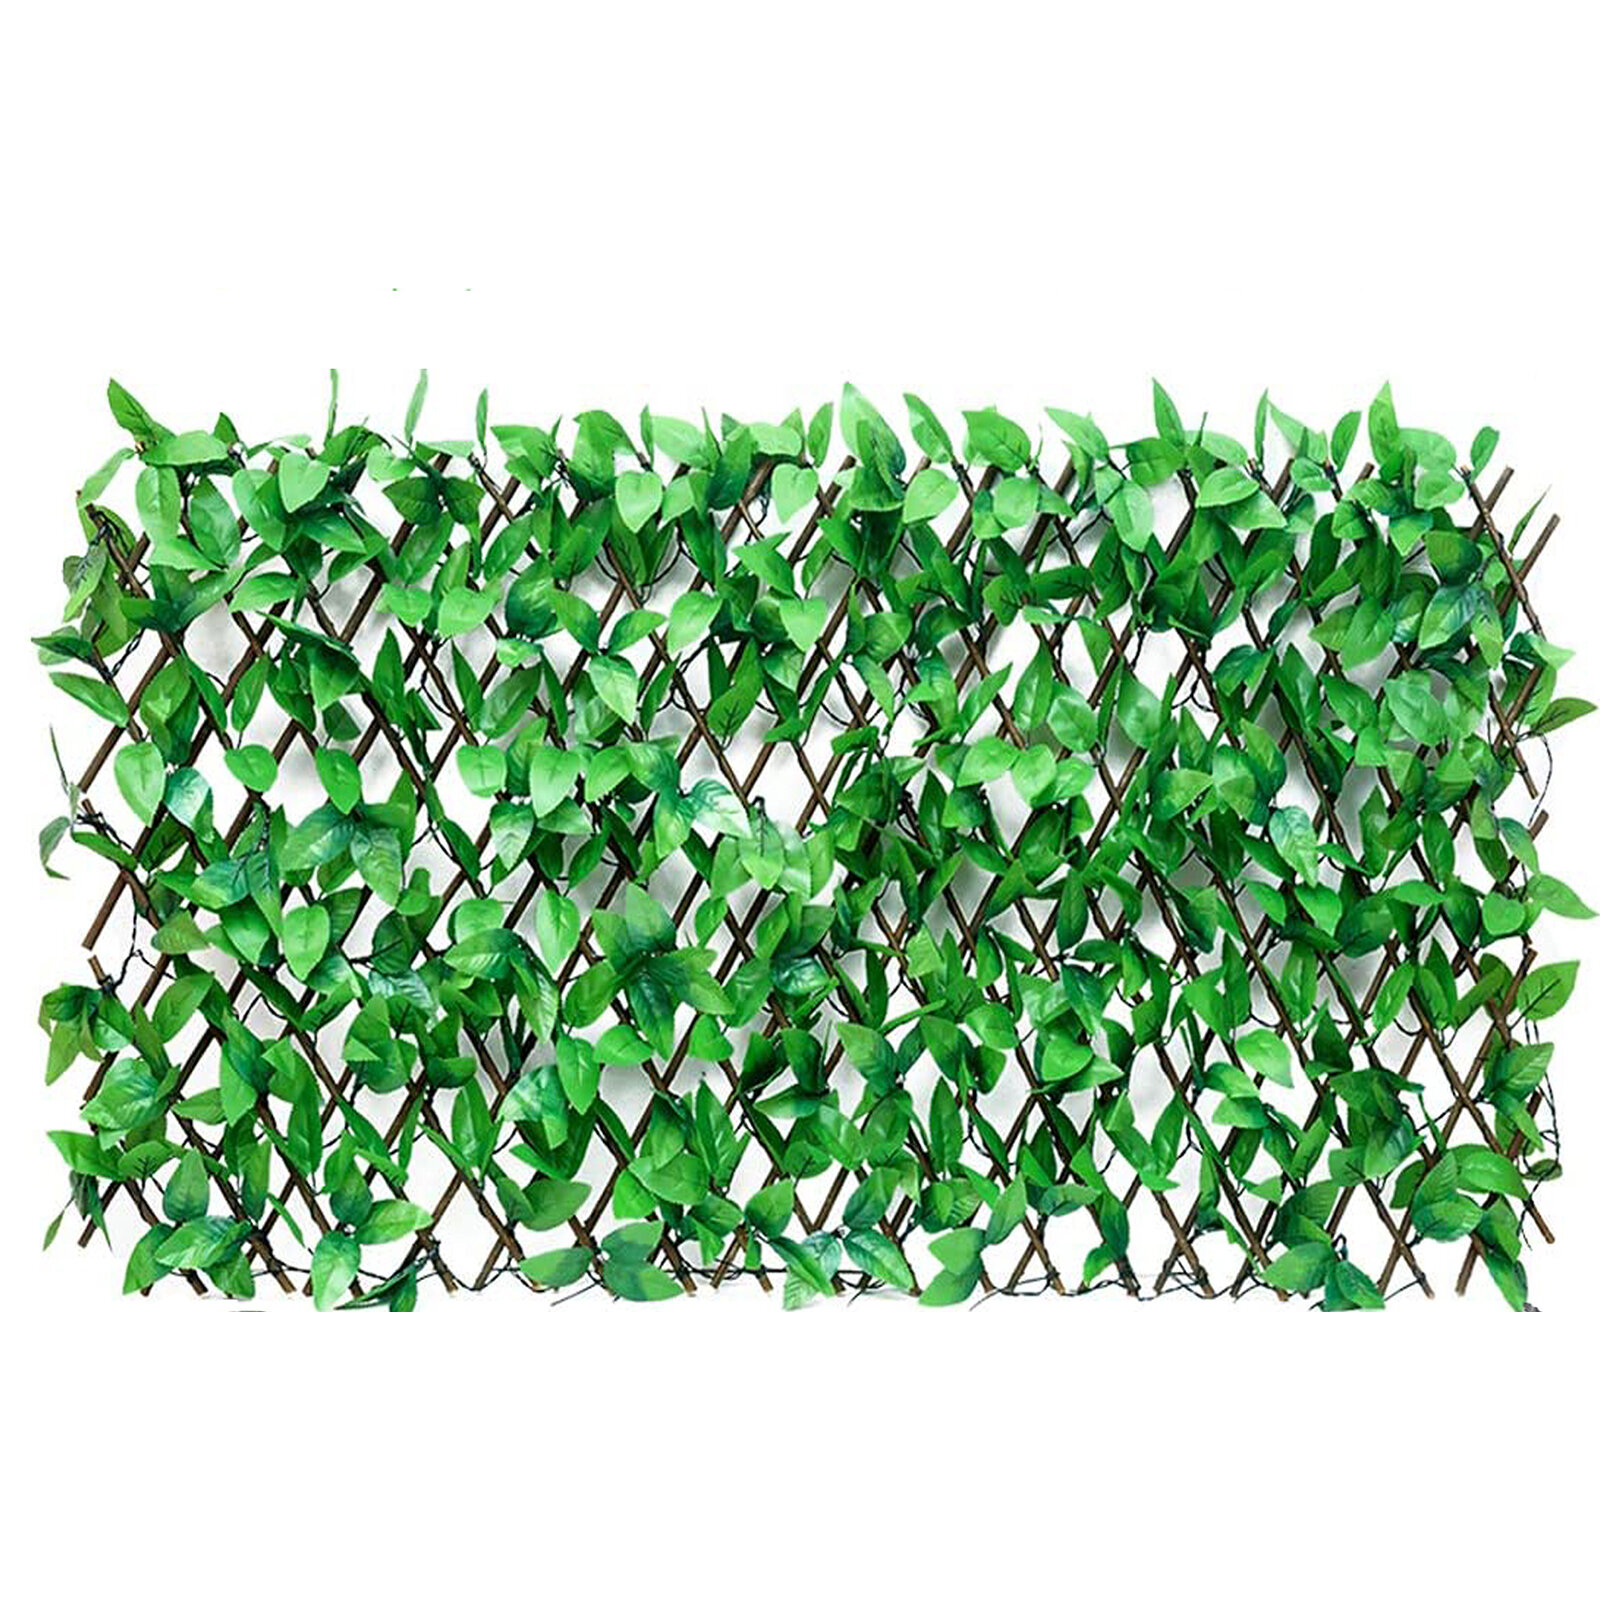 LYLON Expandable Trellis Fence Hedge Privacy Screen with Leaves 113 Solar LED Lights Rectractable Artificial Ivy Fence Decorative for Balcony Patio Outdoor Backdrop Garden Backyard Home Decorations 